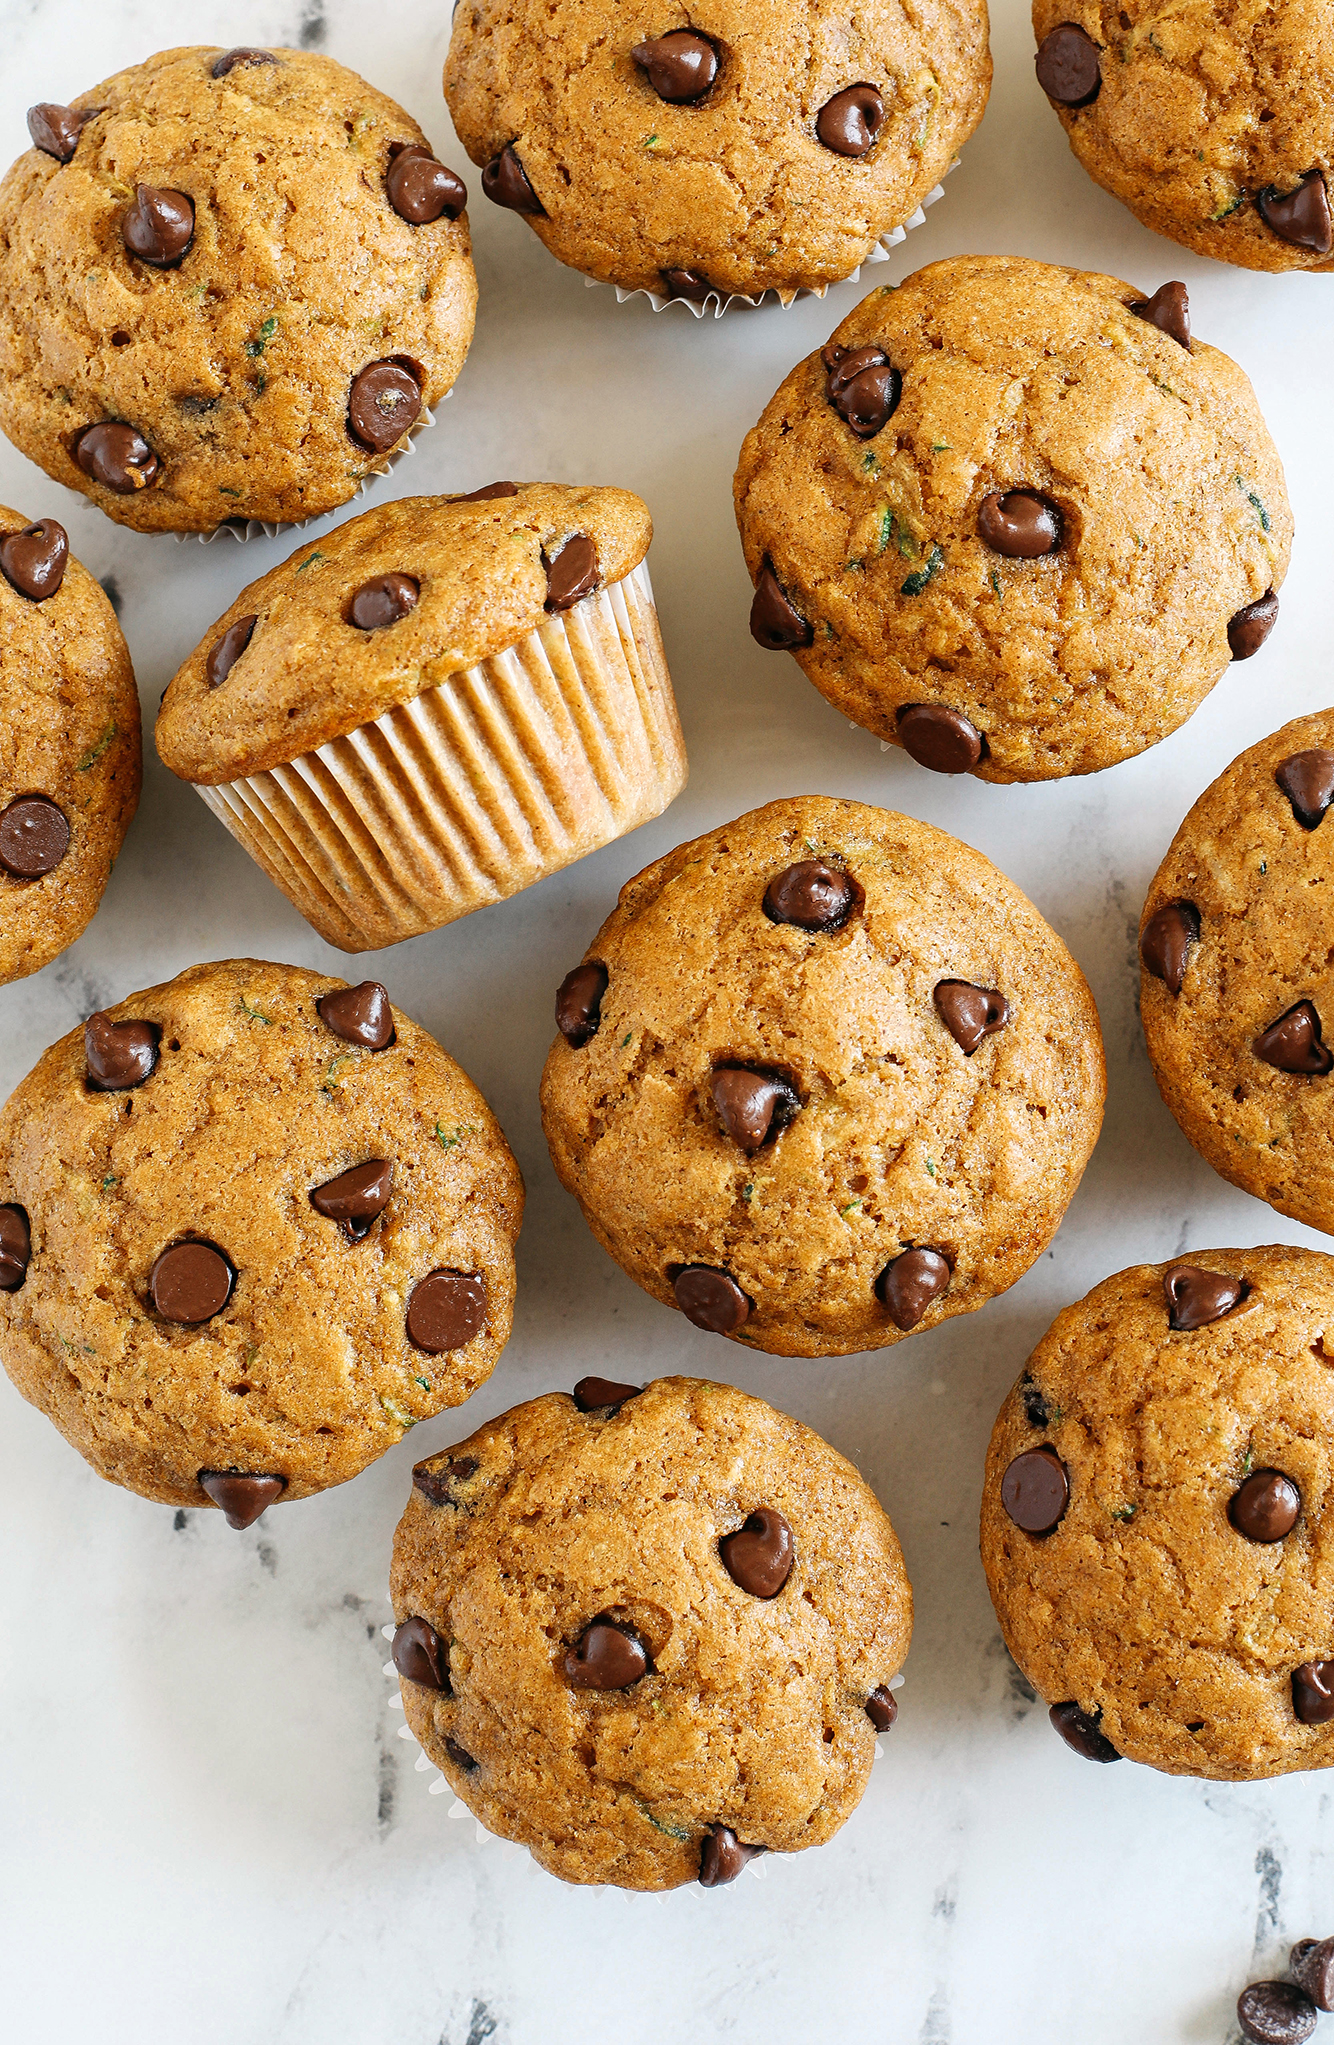 These Chocolate Chip Zucchini Muffins are moist, fluffy, and made healthier with whole wheat flour, Greek yogurt, shredded zucchini and zero butter or refined sugar.  Loaded with warm flavors and chunks of chocolate in every bite!